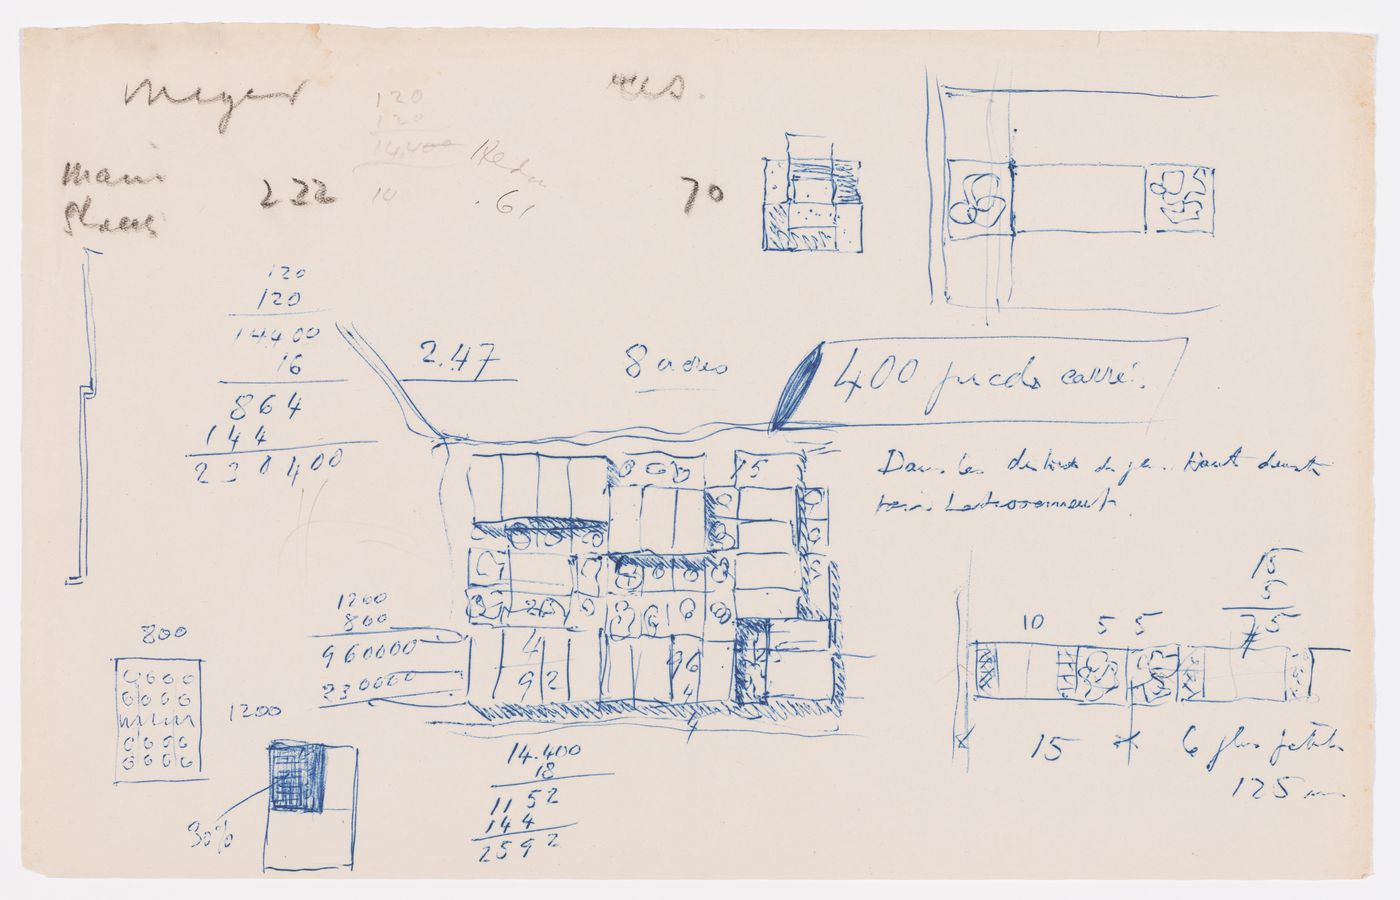 Sketches and notes for dwellings and building possibly in Chandigarh, India